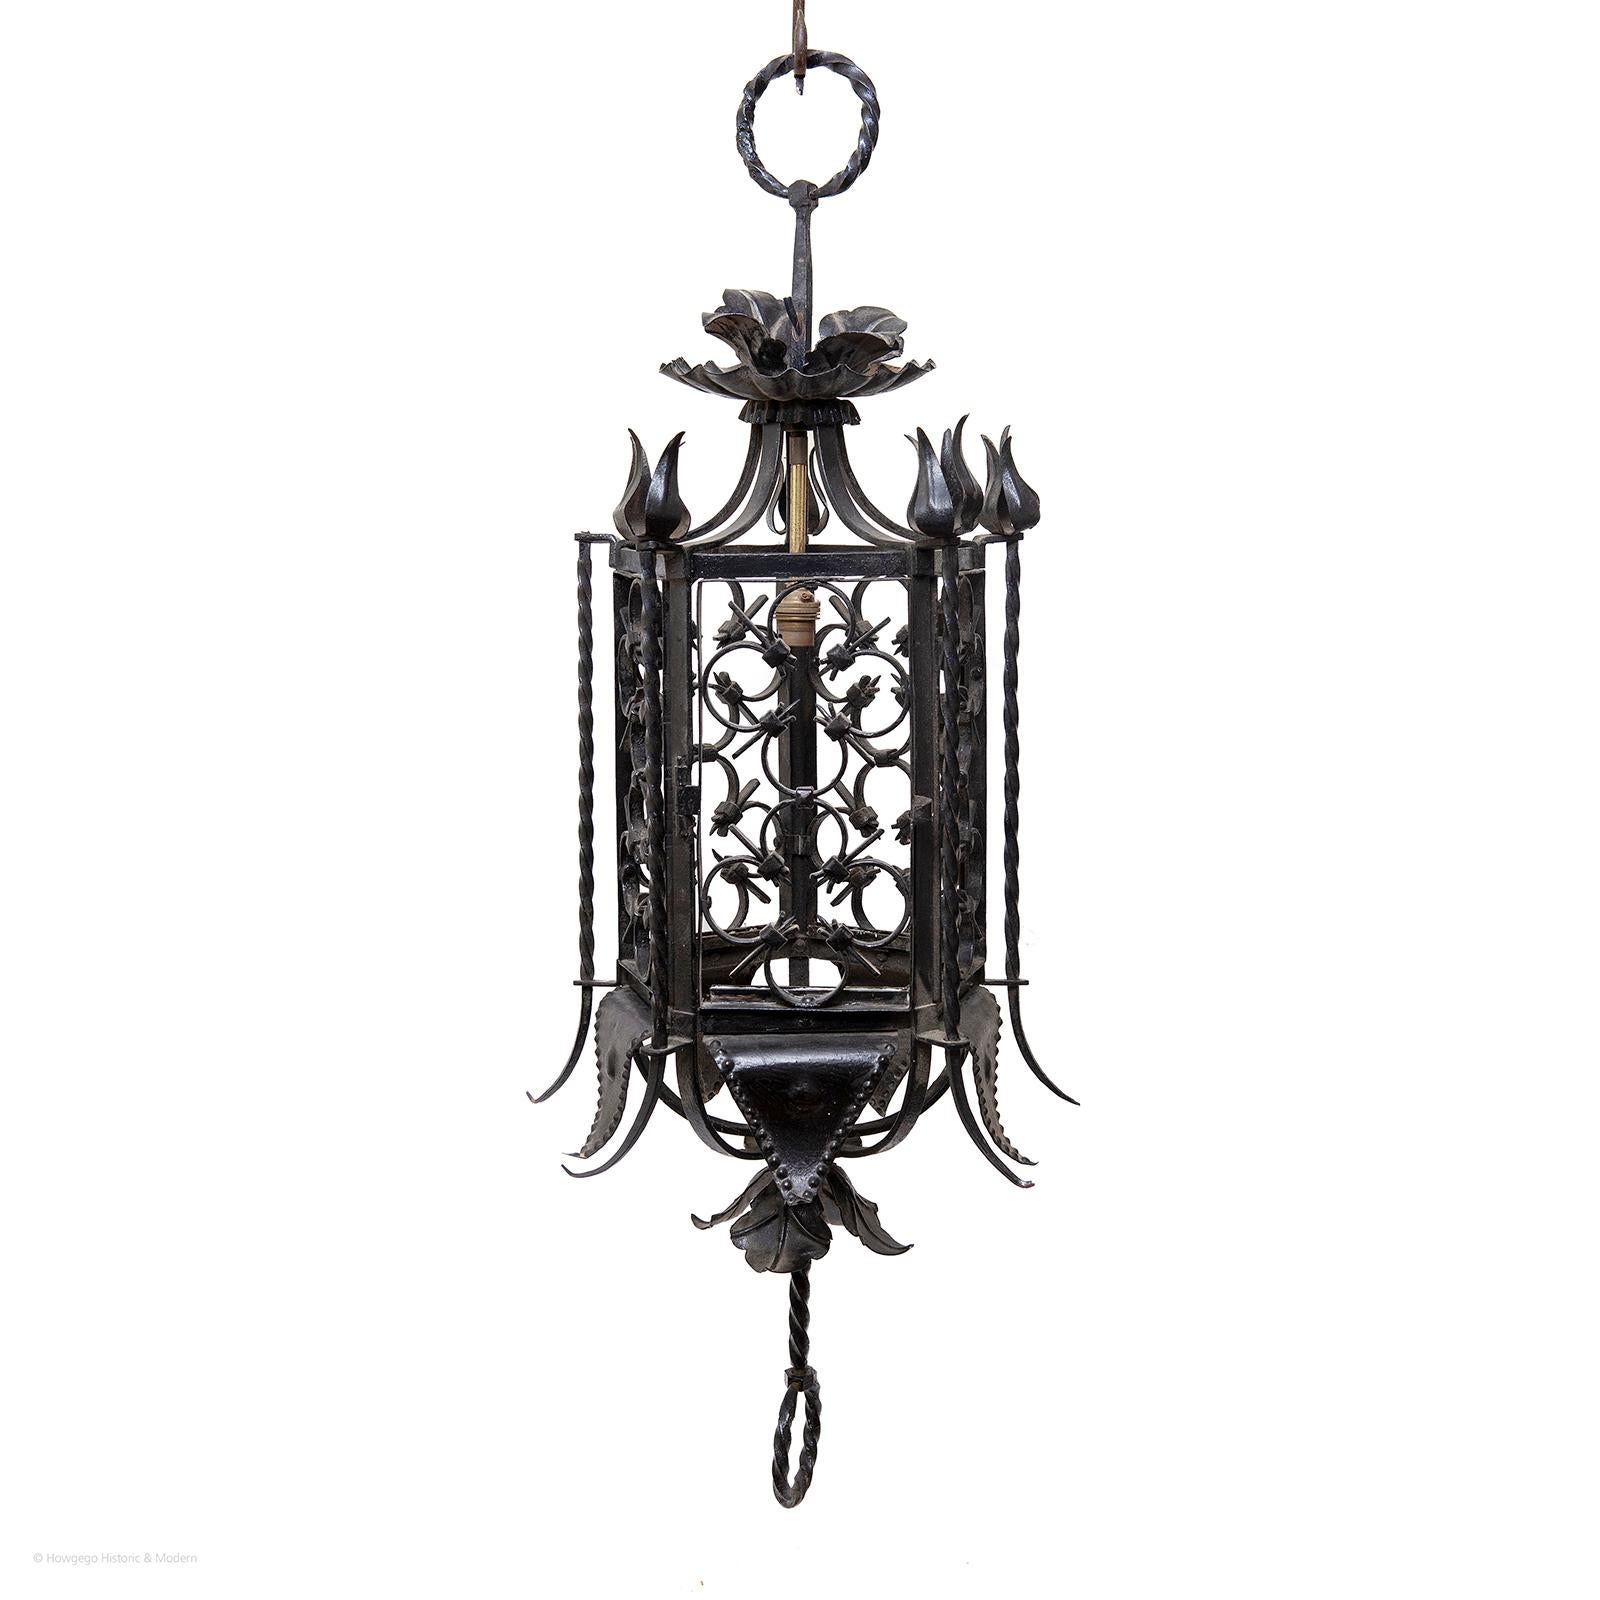 STRIKING, 19TH CENTURY, SPANISH IRON, PENTAGONAL LANTERN, ELECTRIFIED - 96cm., 38” high

Spanish metalwork is renowned for its quality & this striking lantern exudes gravitas
Iron ring above four shaped leaves and a bowl at the top. Each side